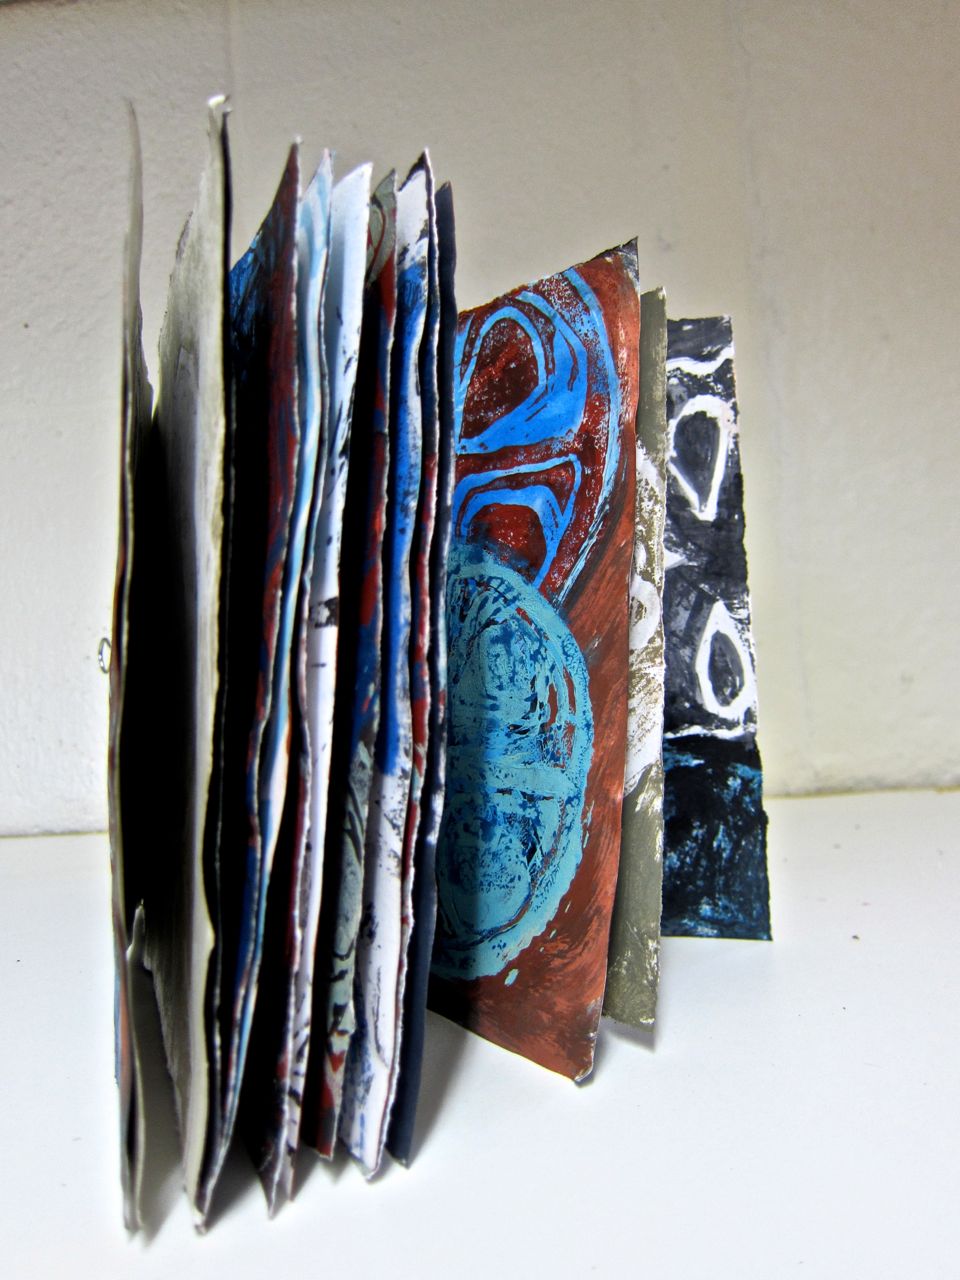 {studio archive}: New Artist Books now available for purchase